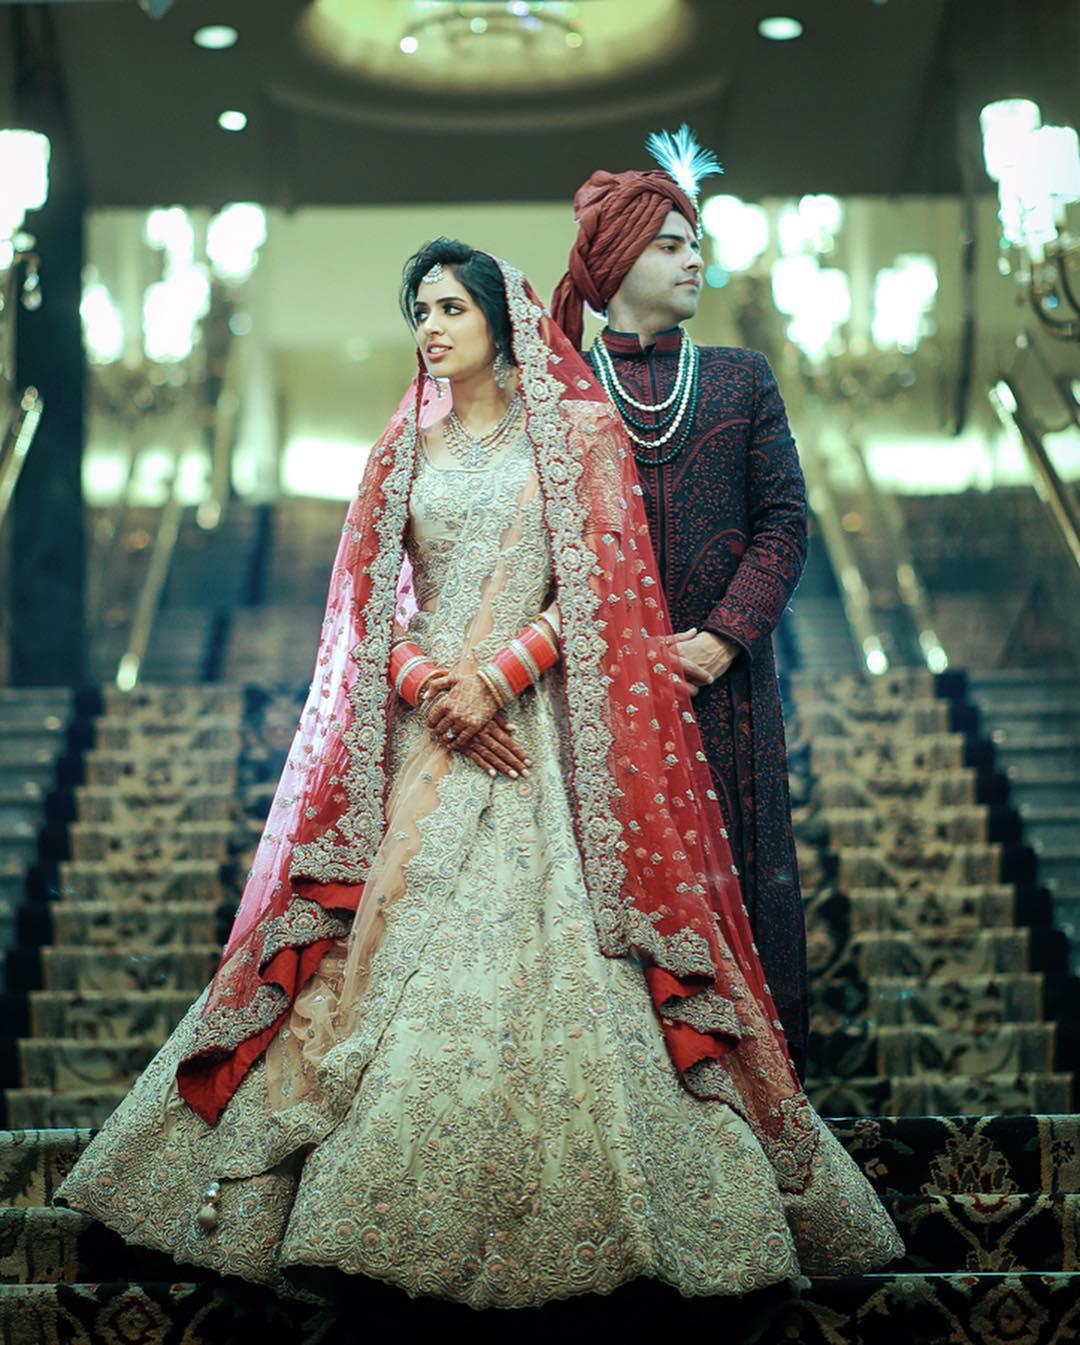 Majestic Palace Wedding with bride in Powder Blue & all things Royal | Couple  wedding dress, Indian wedding outfits, Indian bridal outfits